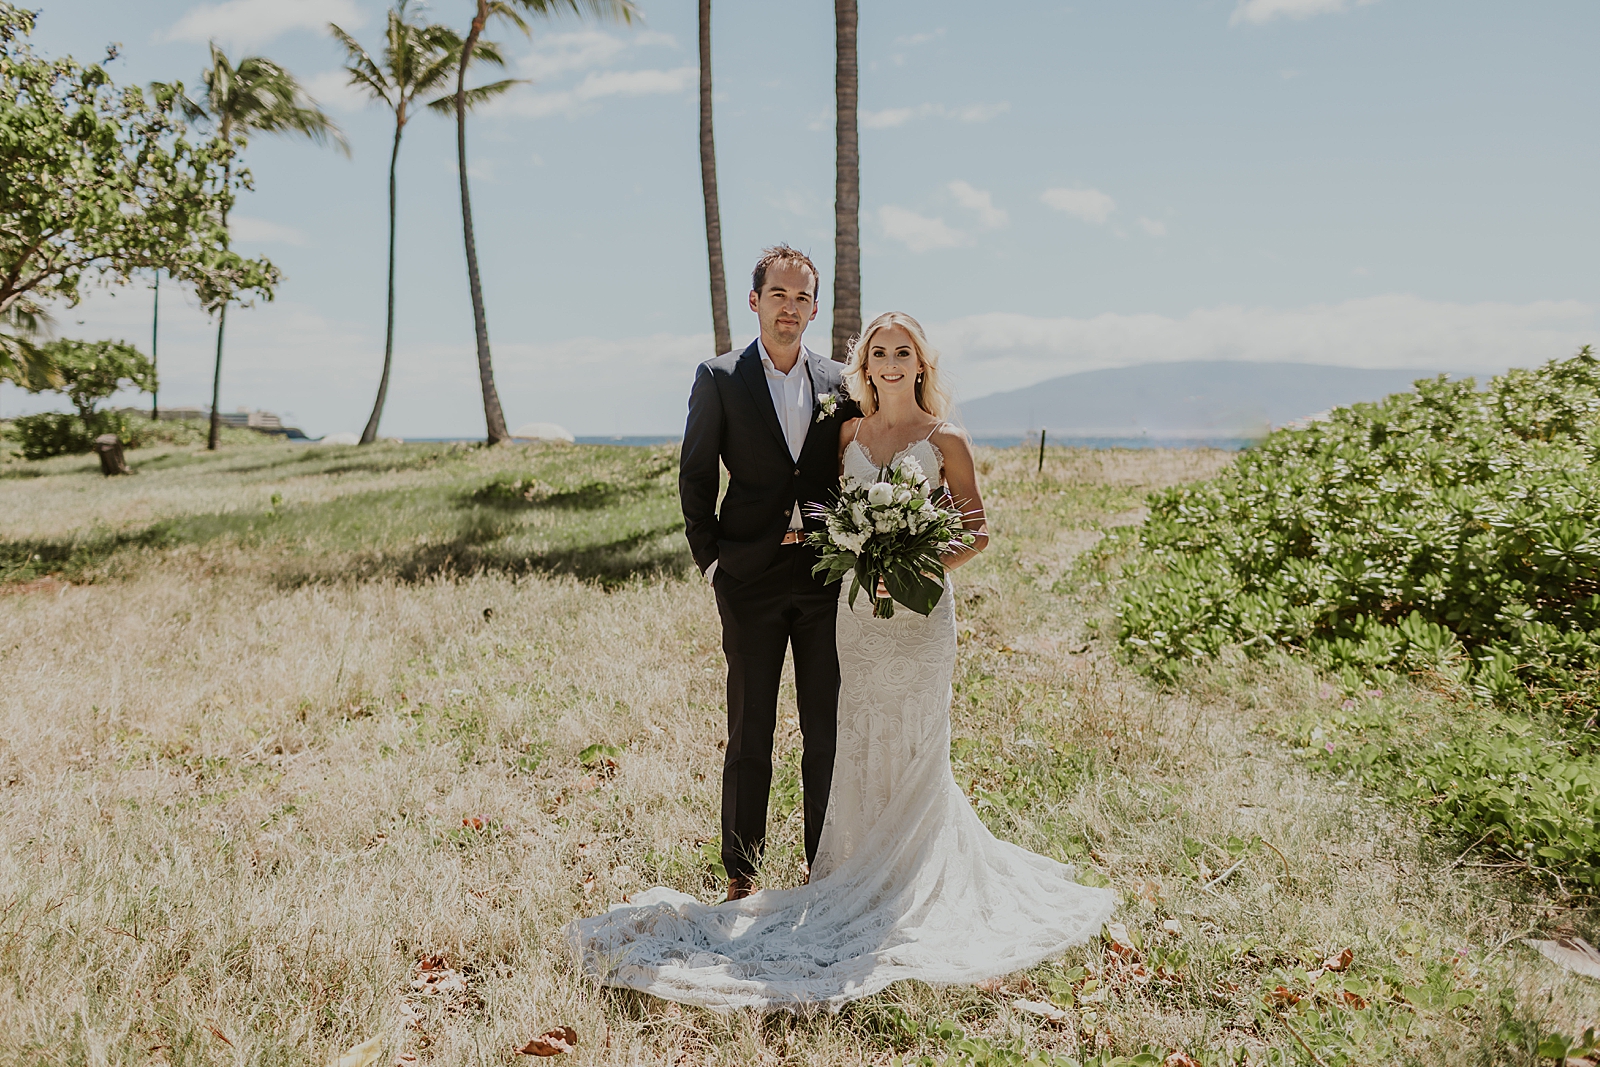 Bride and Groom together on greenery by the beach with tall palm trees